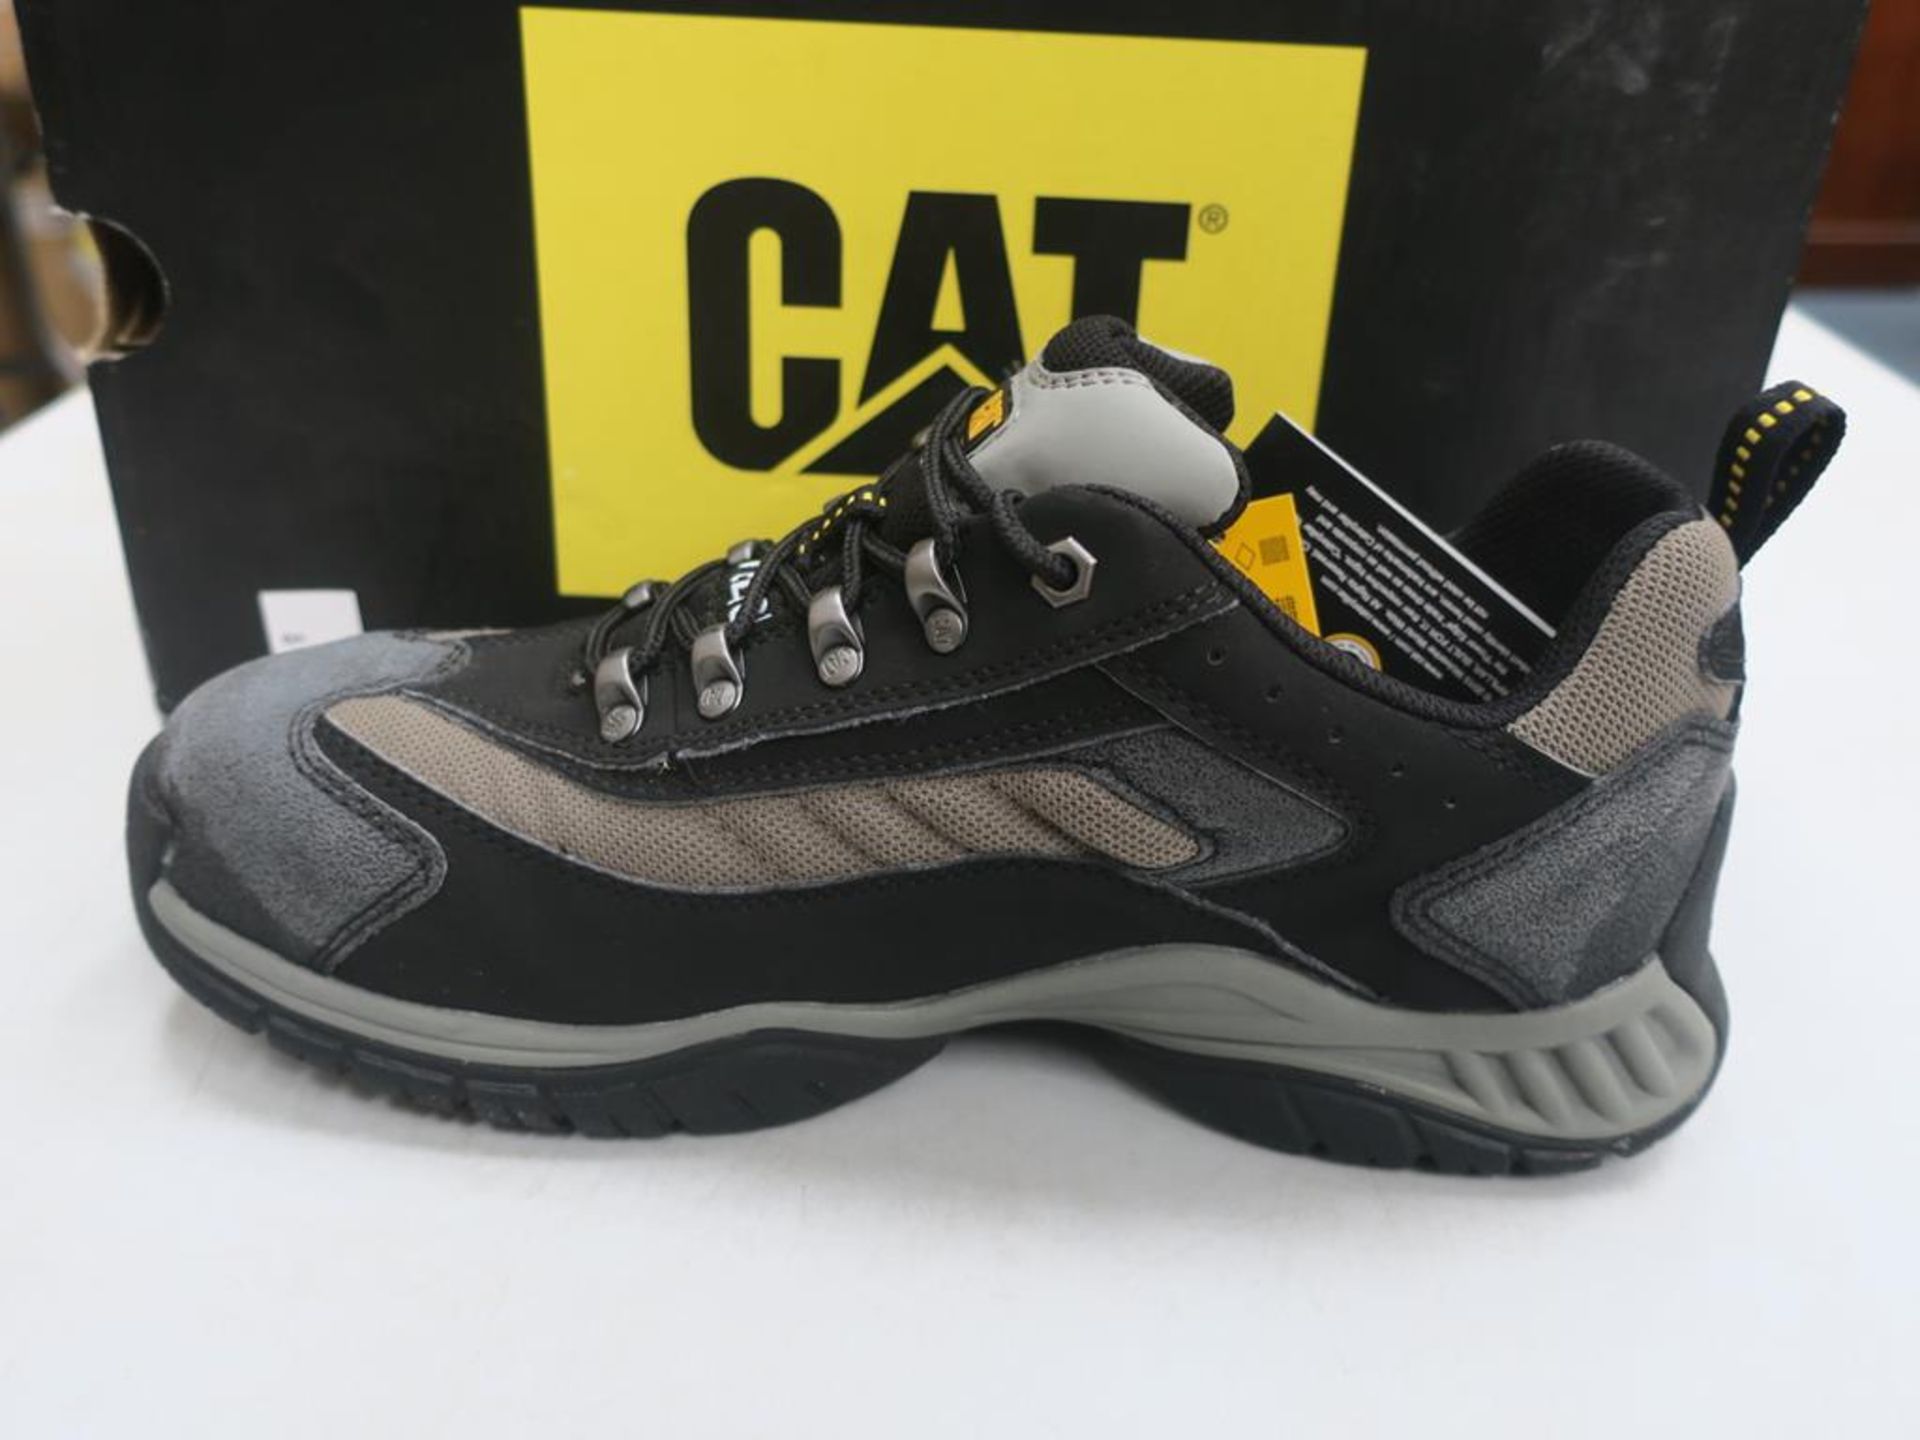 * A pair of New/Boxed CAT Shoes- P705039 Moor ST SB Oxford in black, UK size 7 - Image 2 of 3